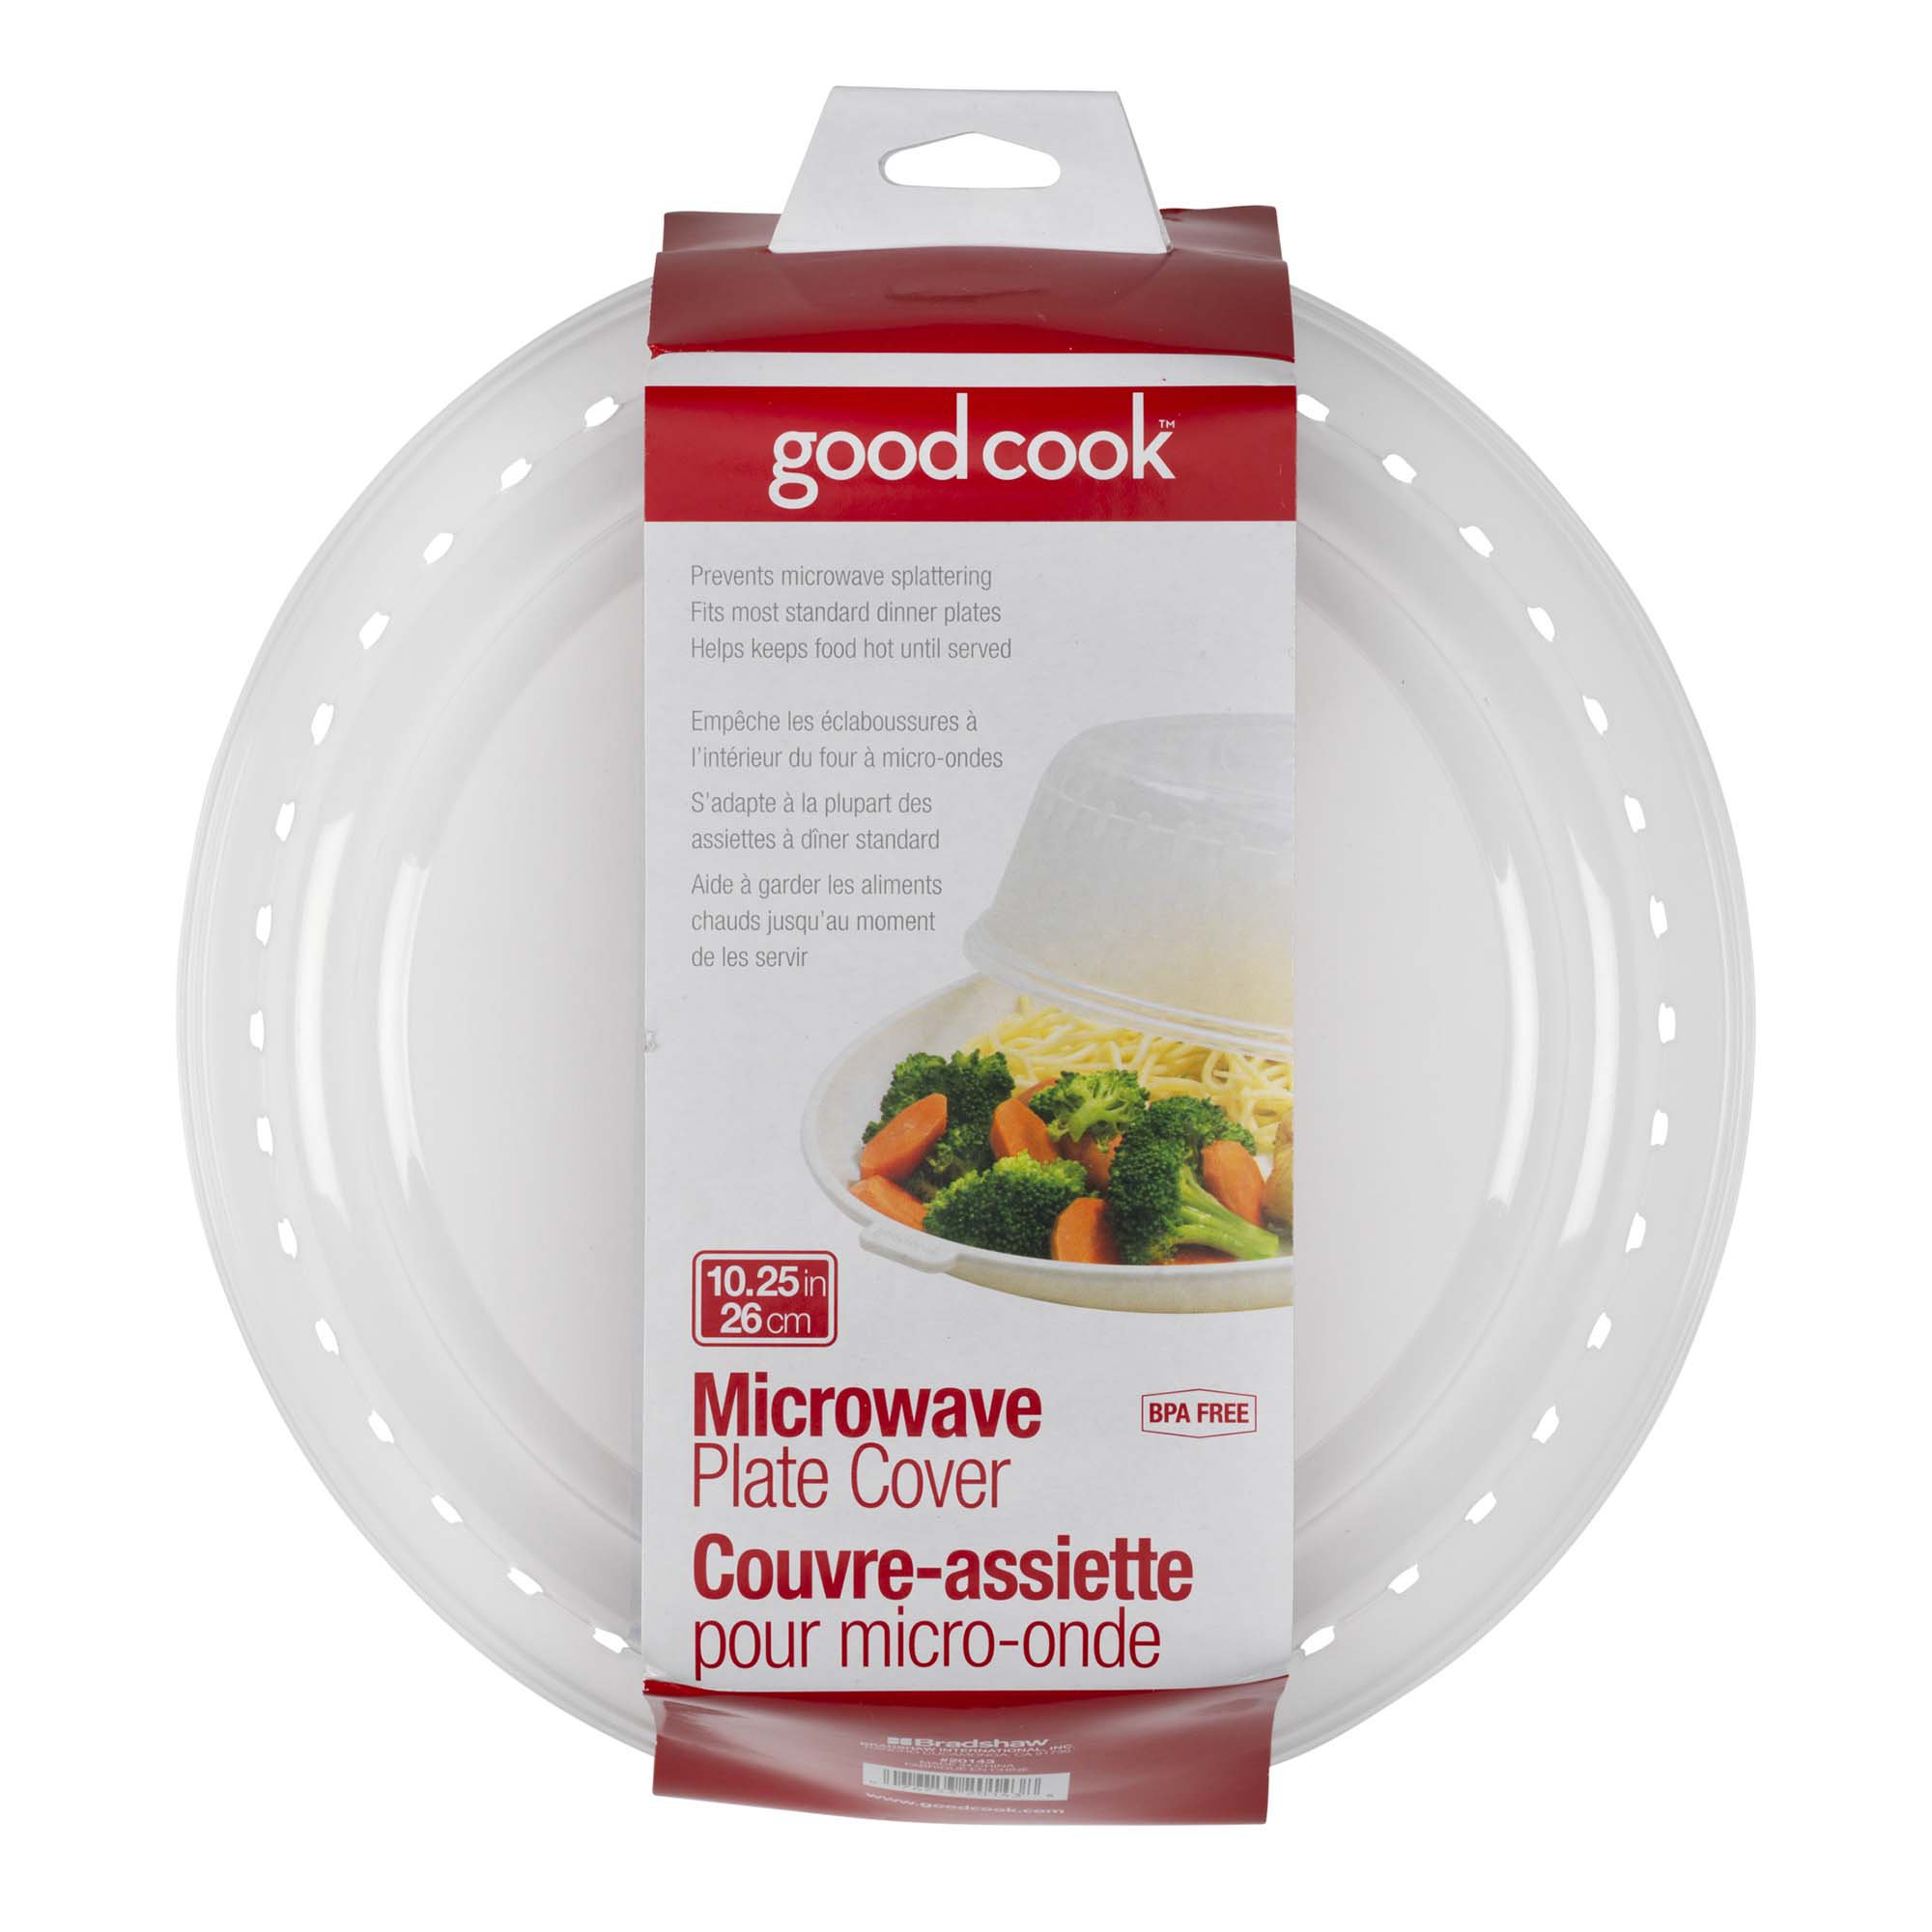 Good Cook Microwave Plate Cover - Shop Appliances at H-E-B